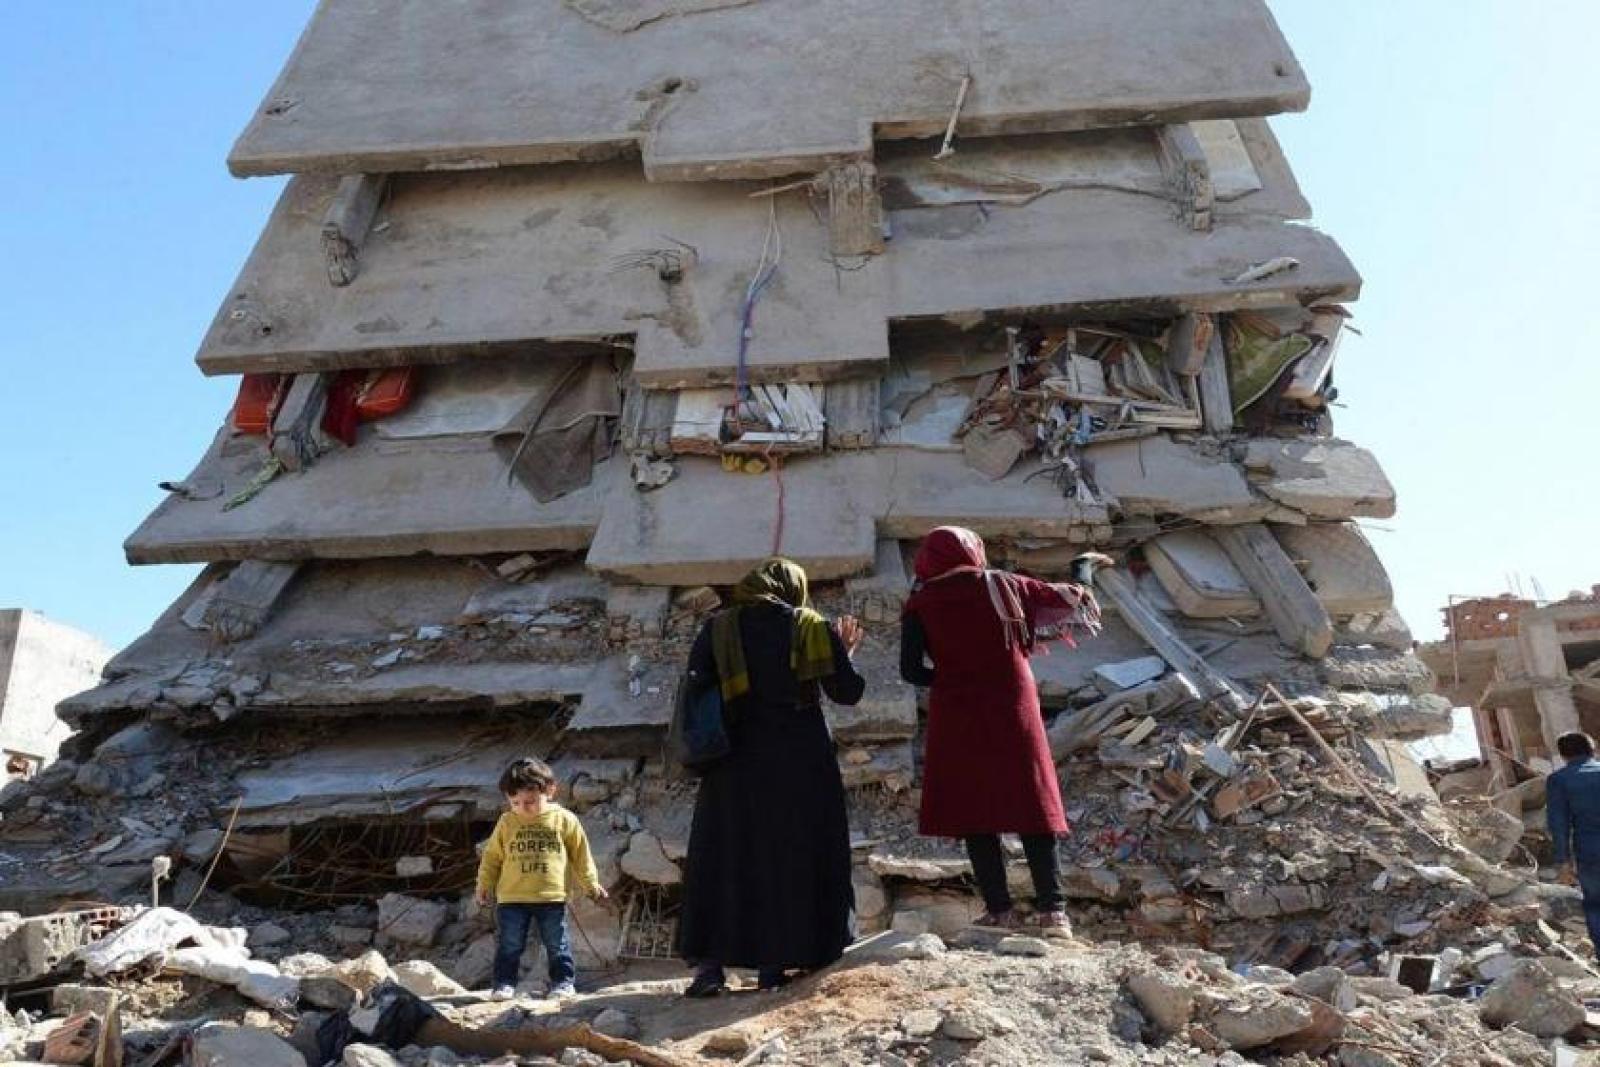 A family standing against ruined building